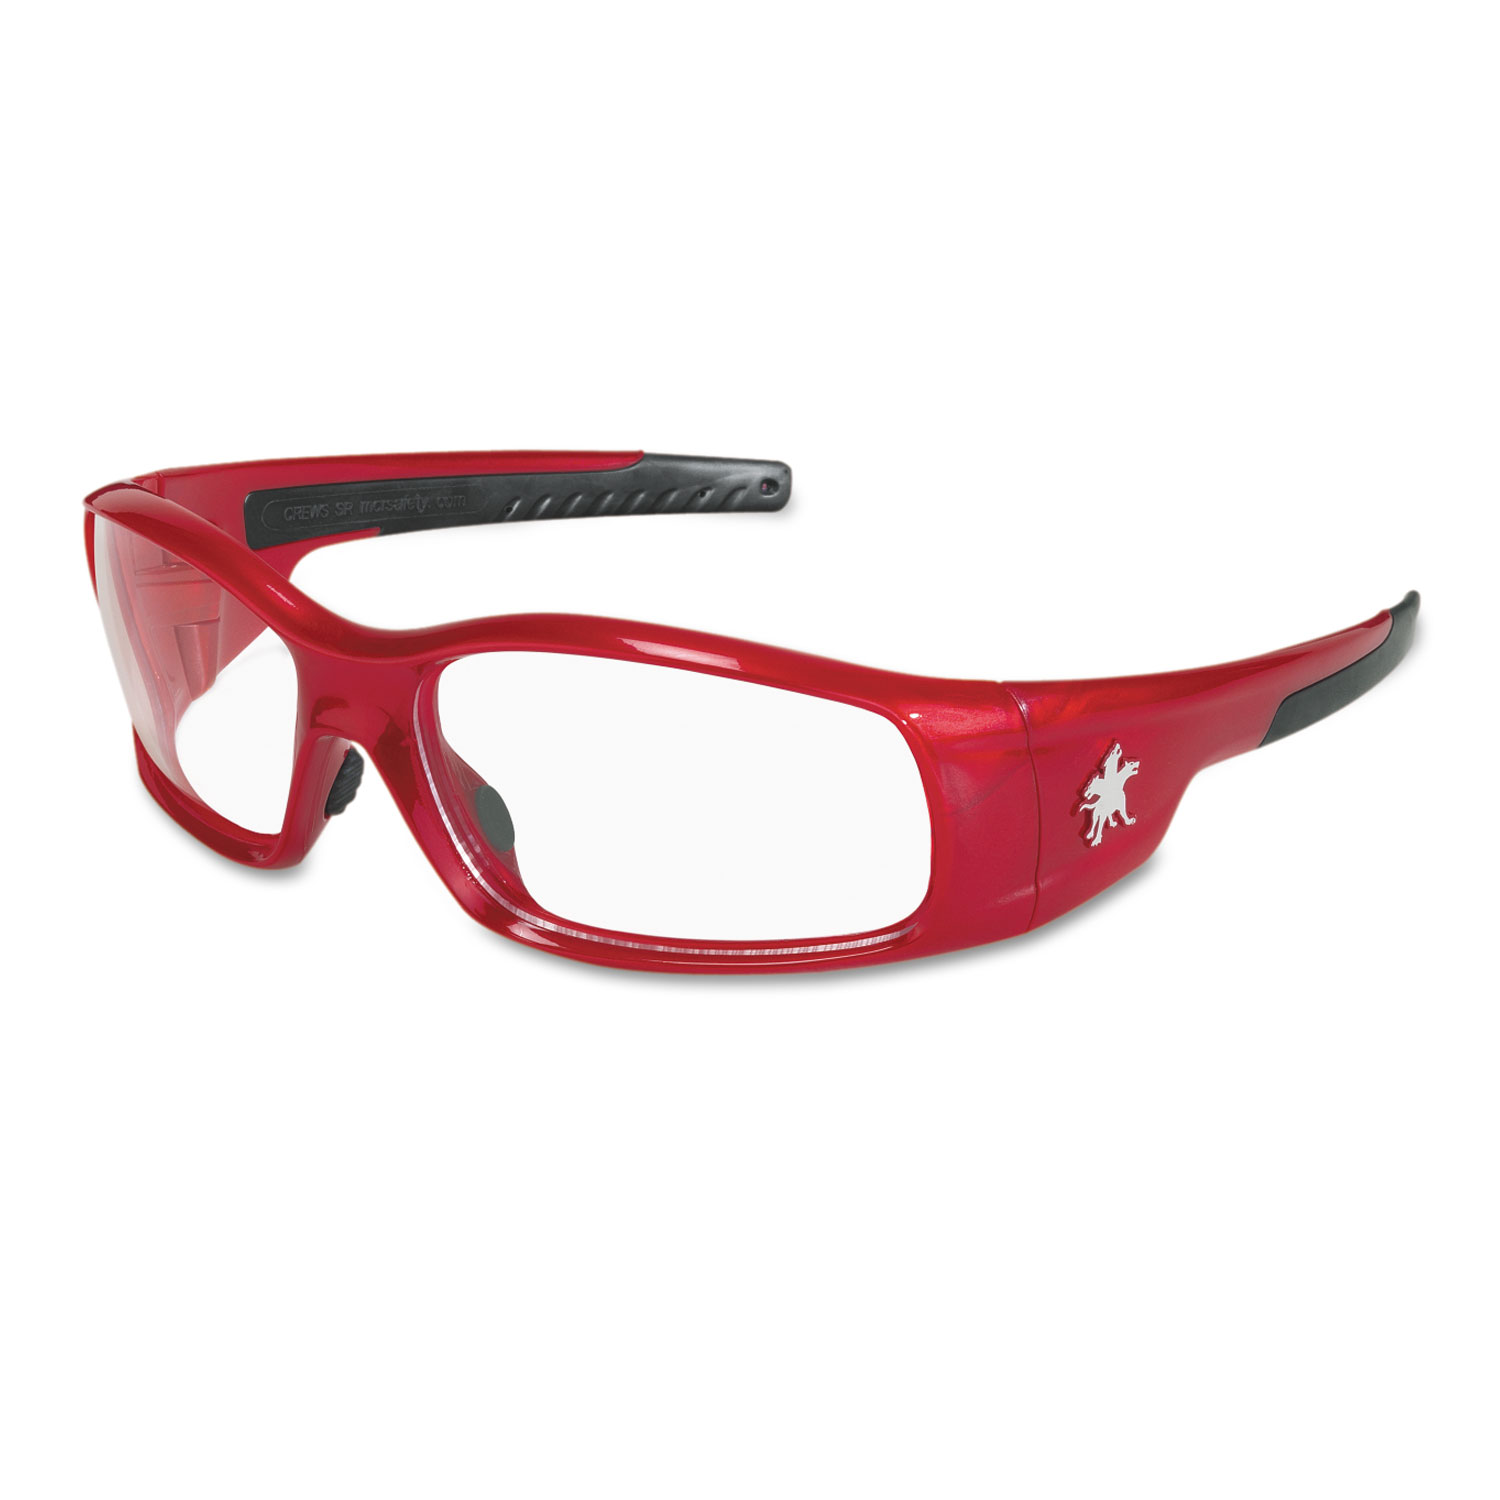 Swagger Safety Glasses, Red Frame, Clear Lens